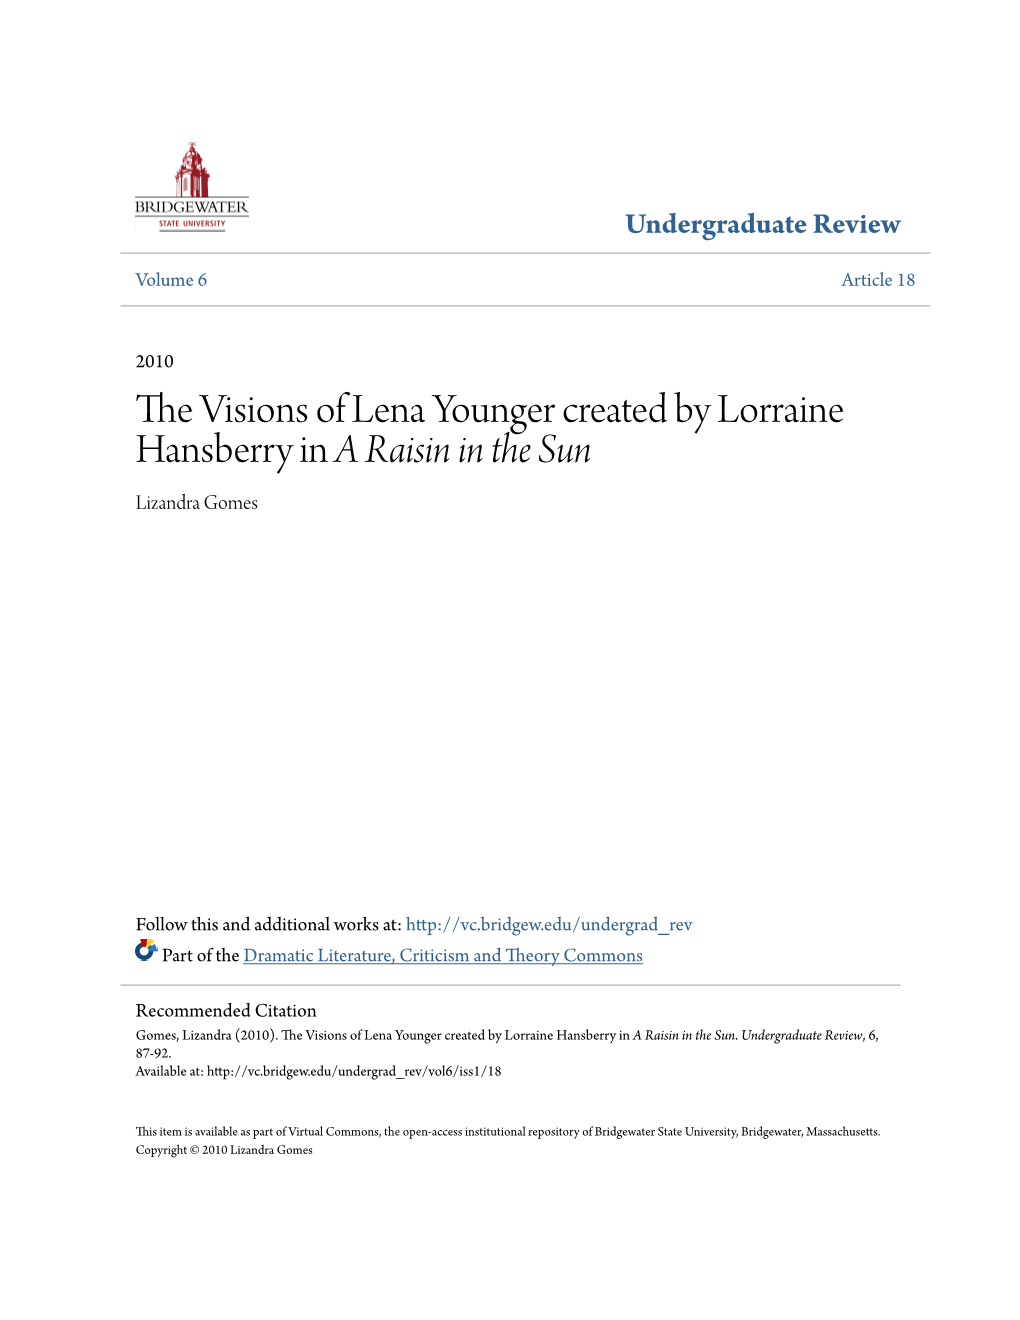 The Visions of Lena Younger Created by Lorraine Hansberry in &lt;Em&gt;A Raisin in the Sun&lt;/Em&gt;